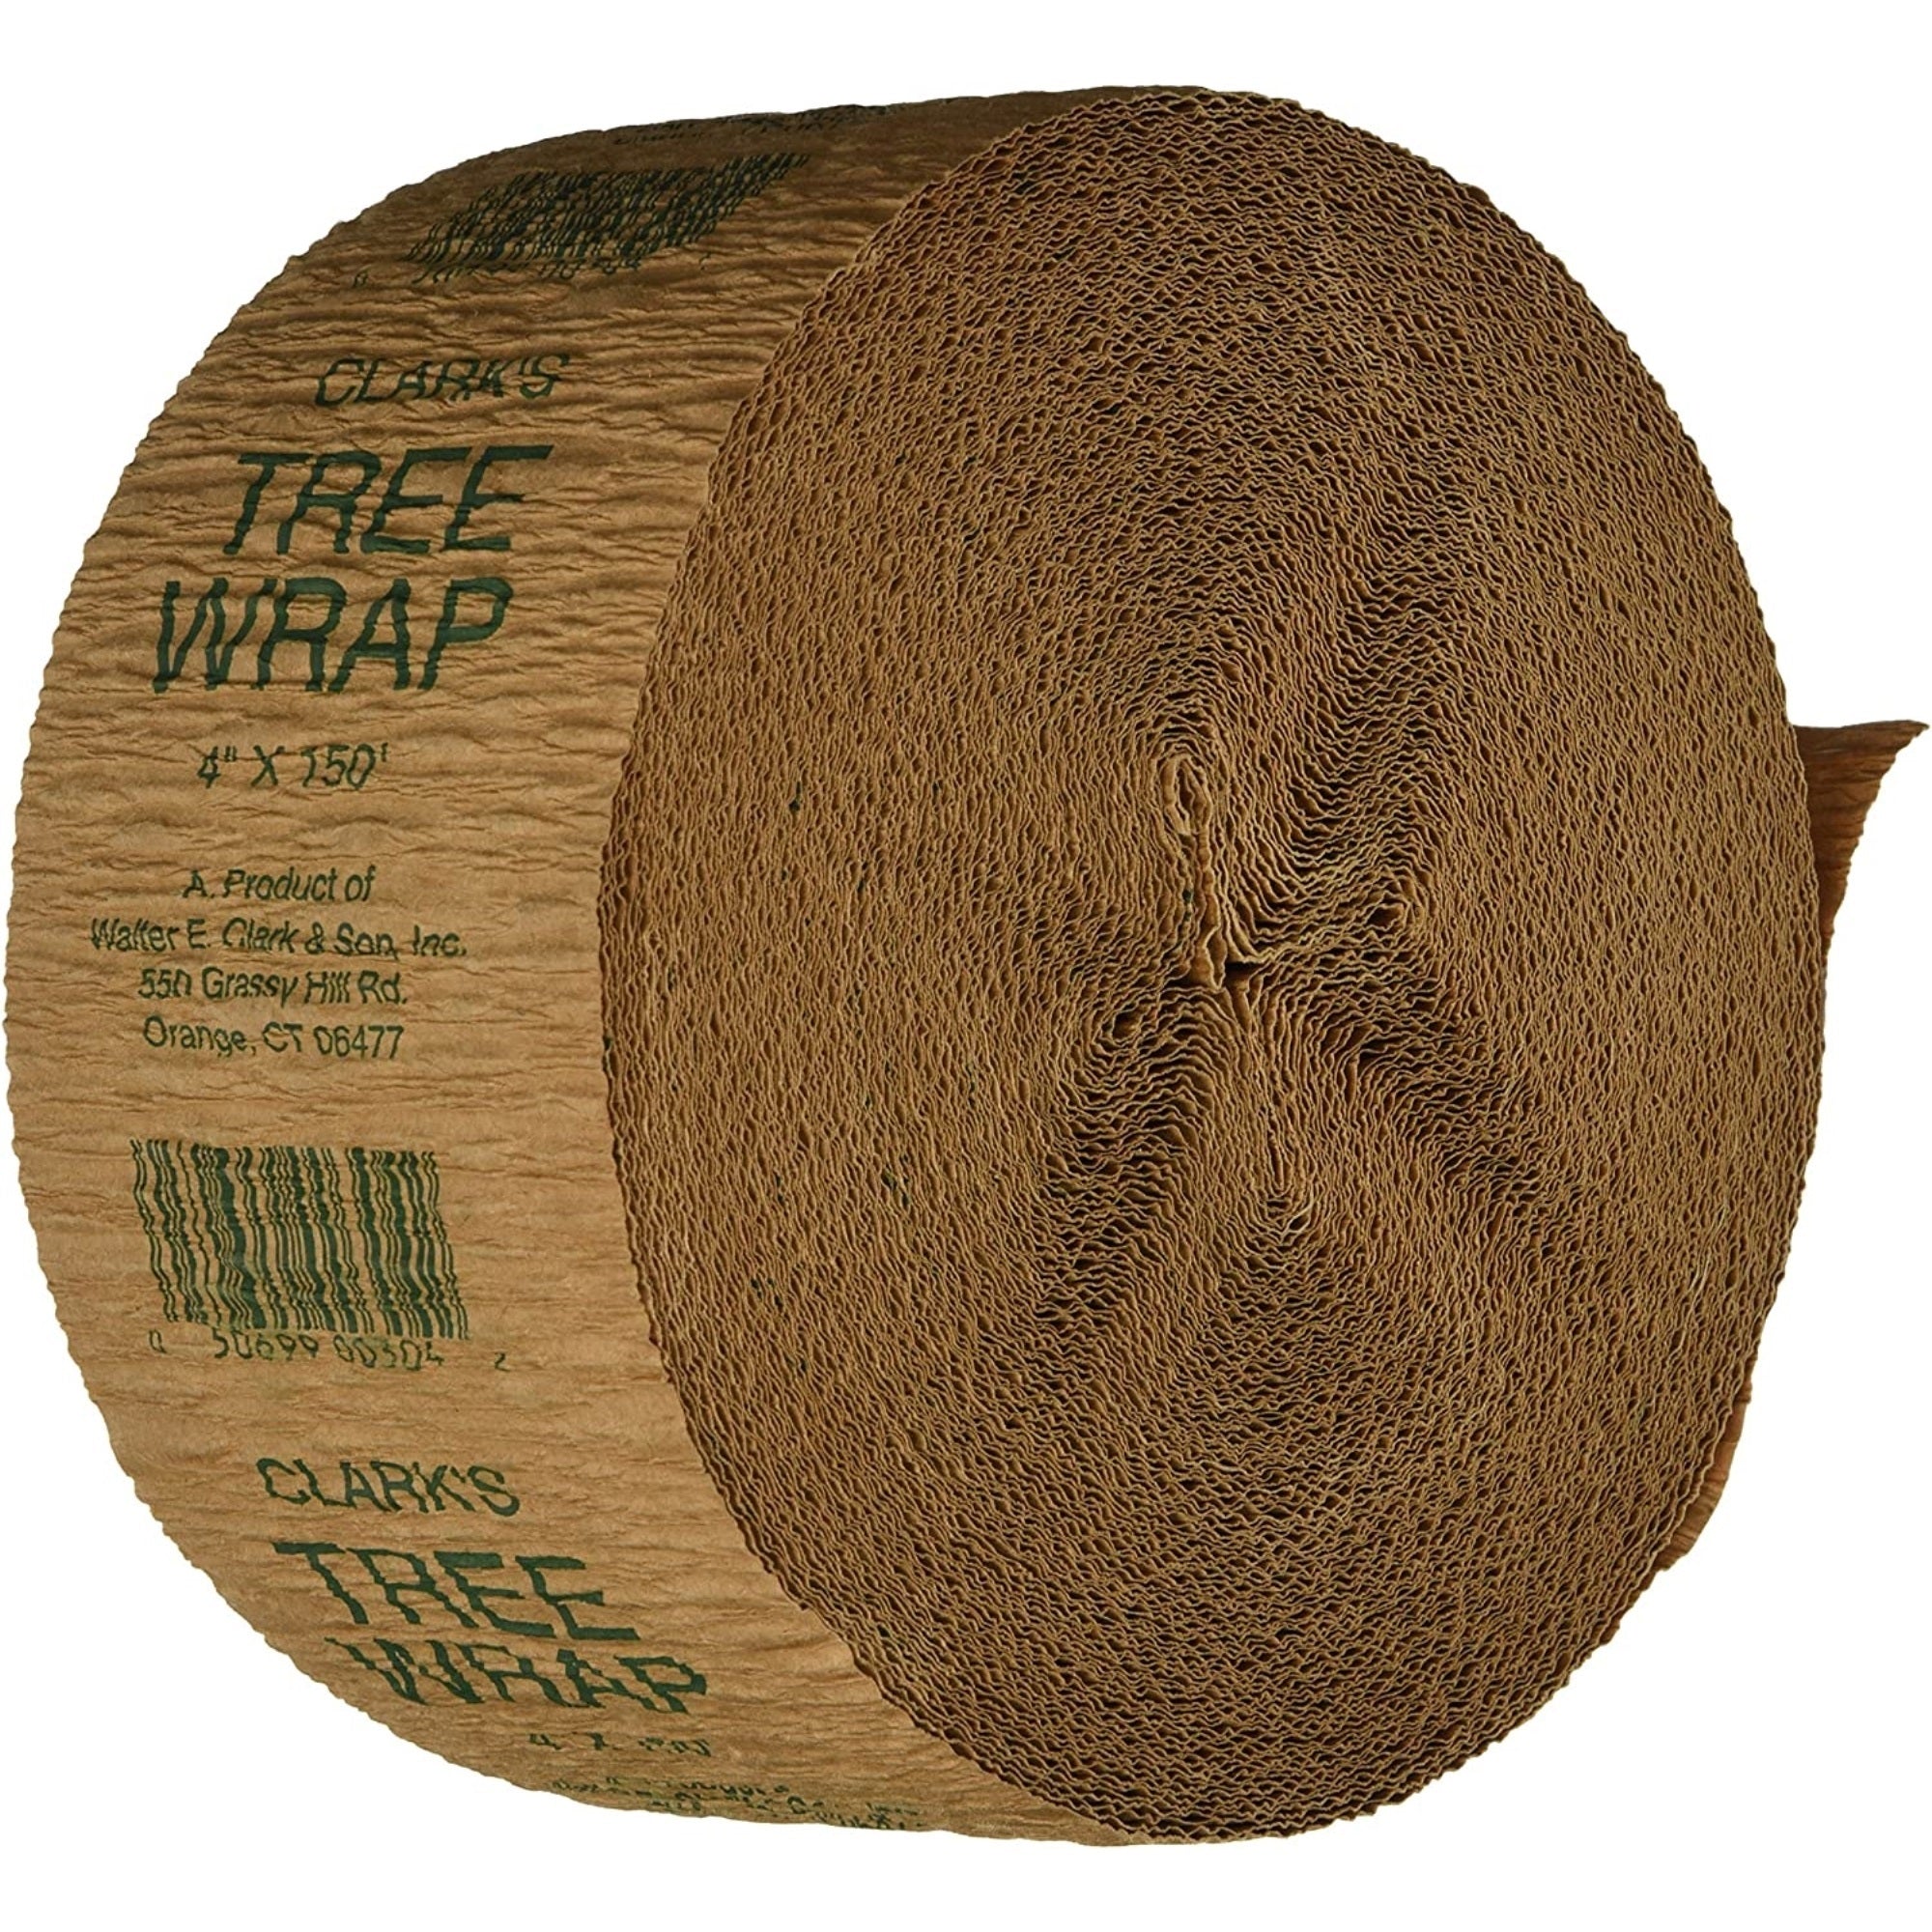 Walter E Clark Creped Coated Paper Protective Tree Wrap – 4” W x 150’ Roll